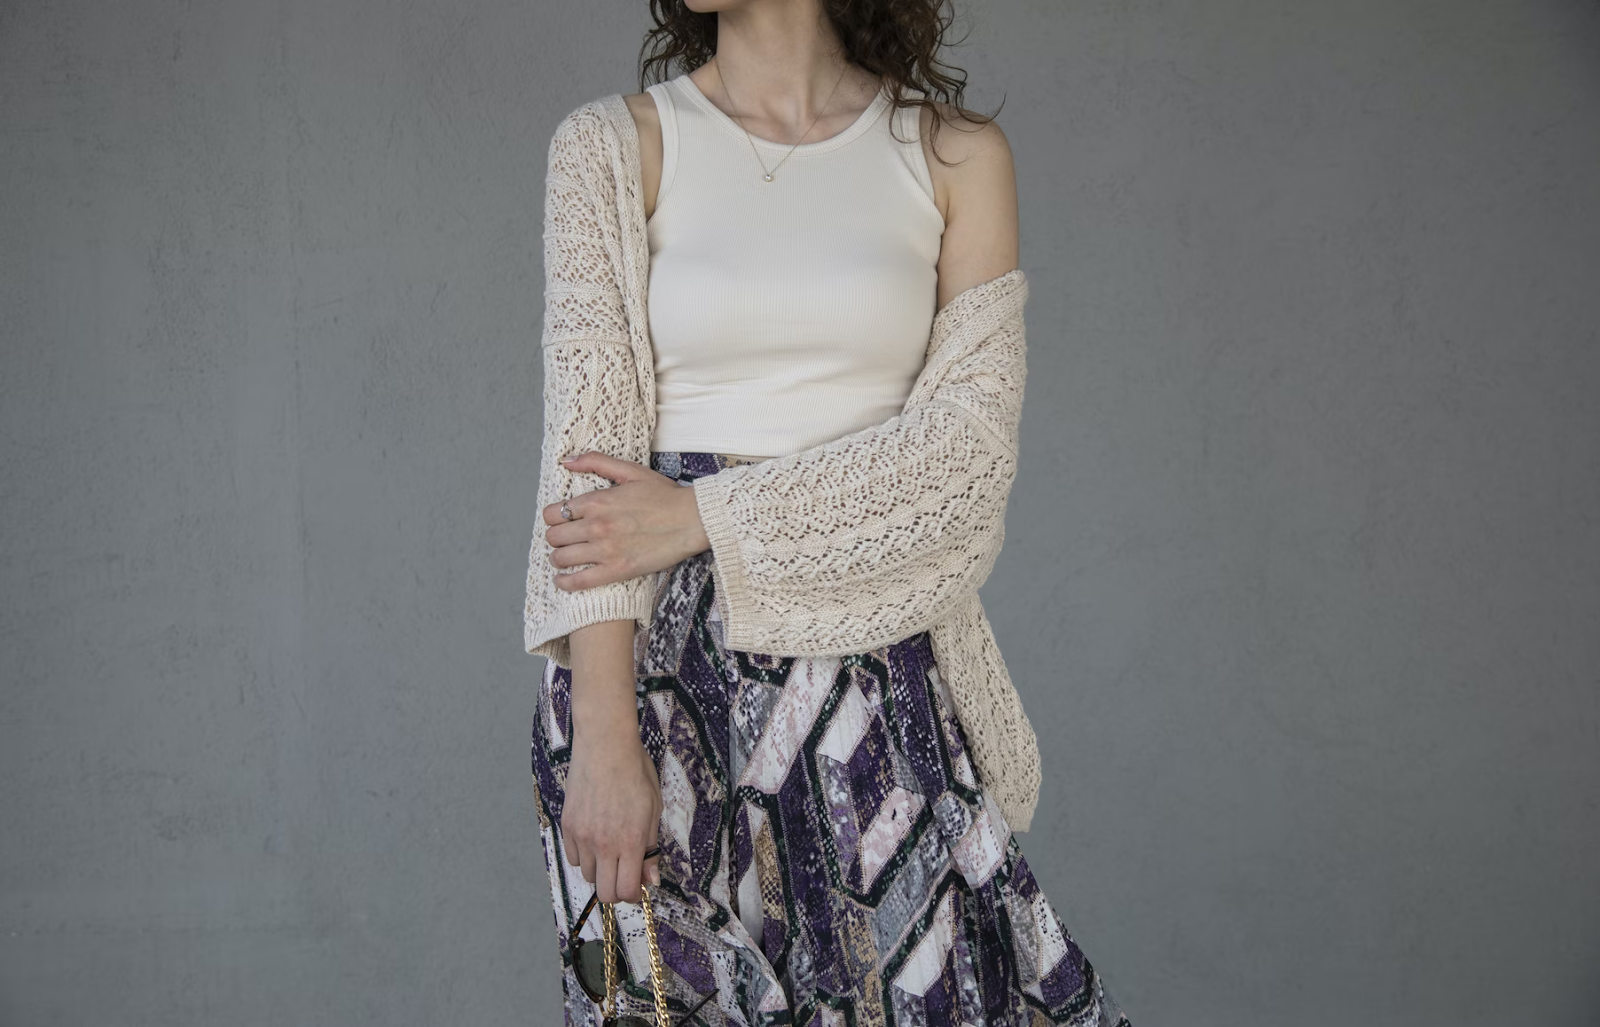 layer without looking bulky: a woman wearing an off white tank top with a crocheted cardigan and dark color patterned pants with geometric shapes